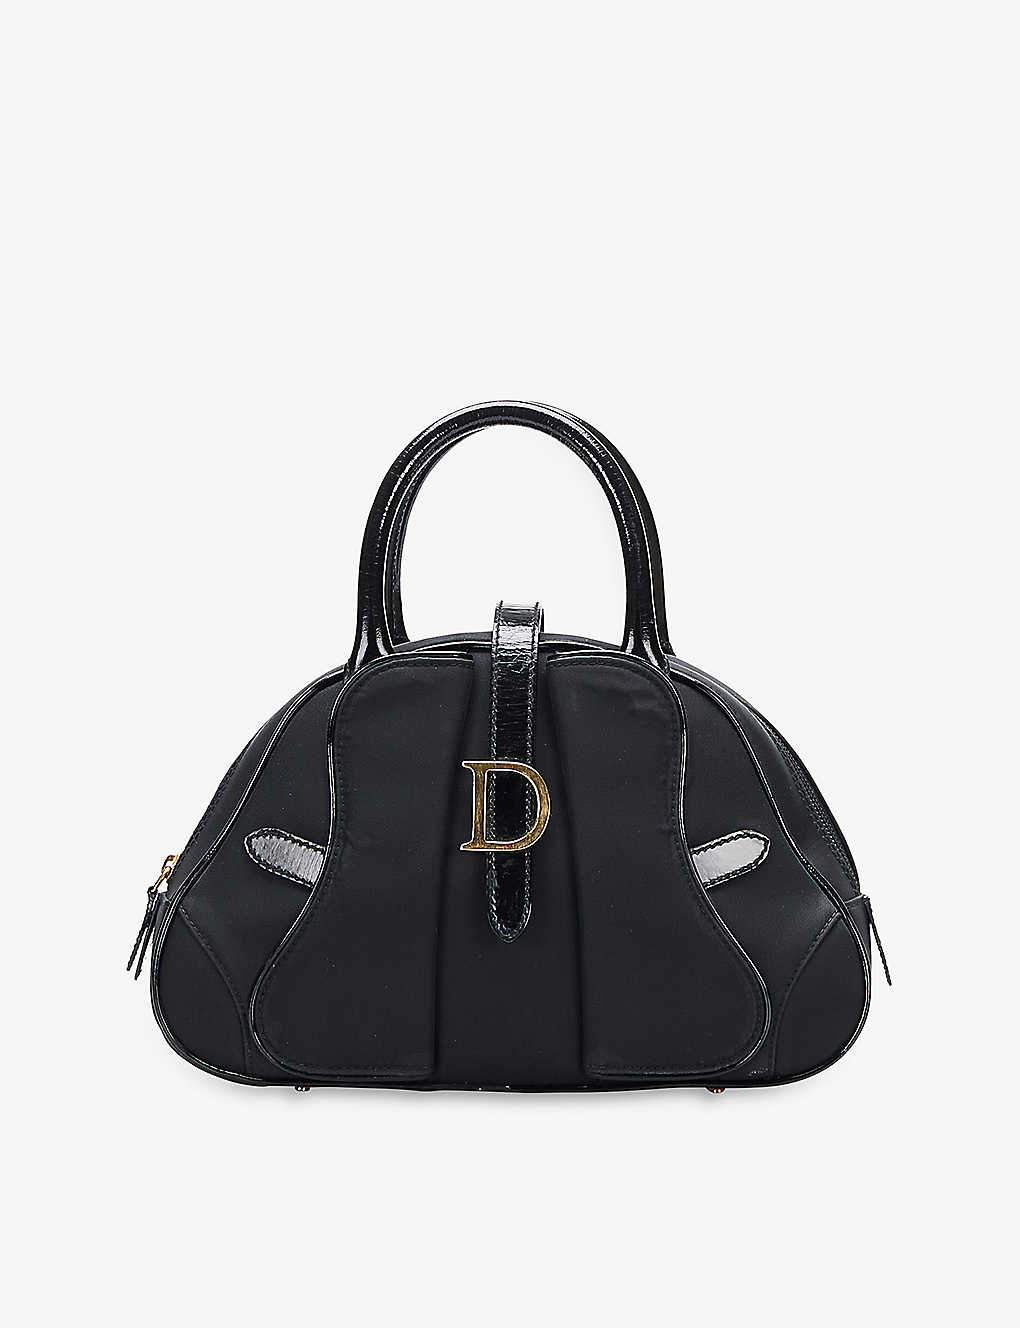 Reselfridges Womens Black Pre-loved Dior Double Dome Saddle Woven Top Handle Bag